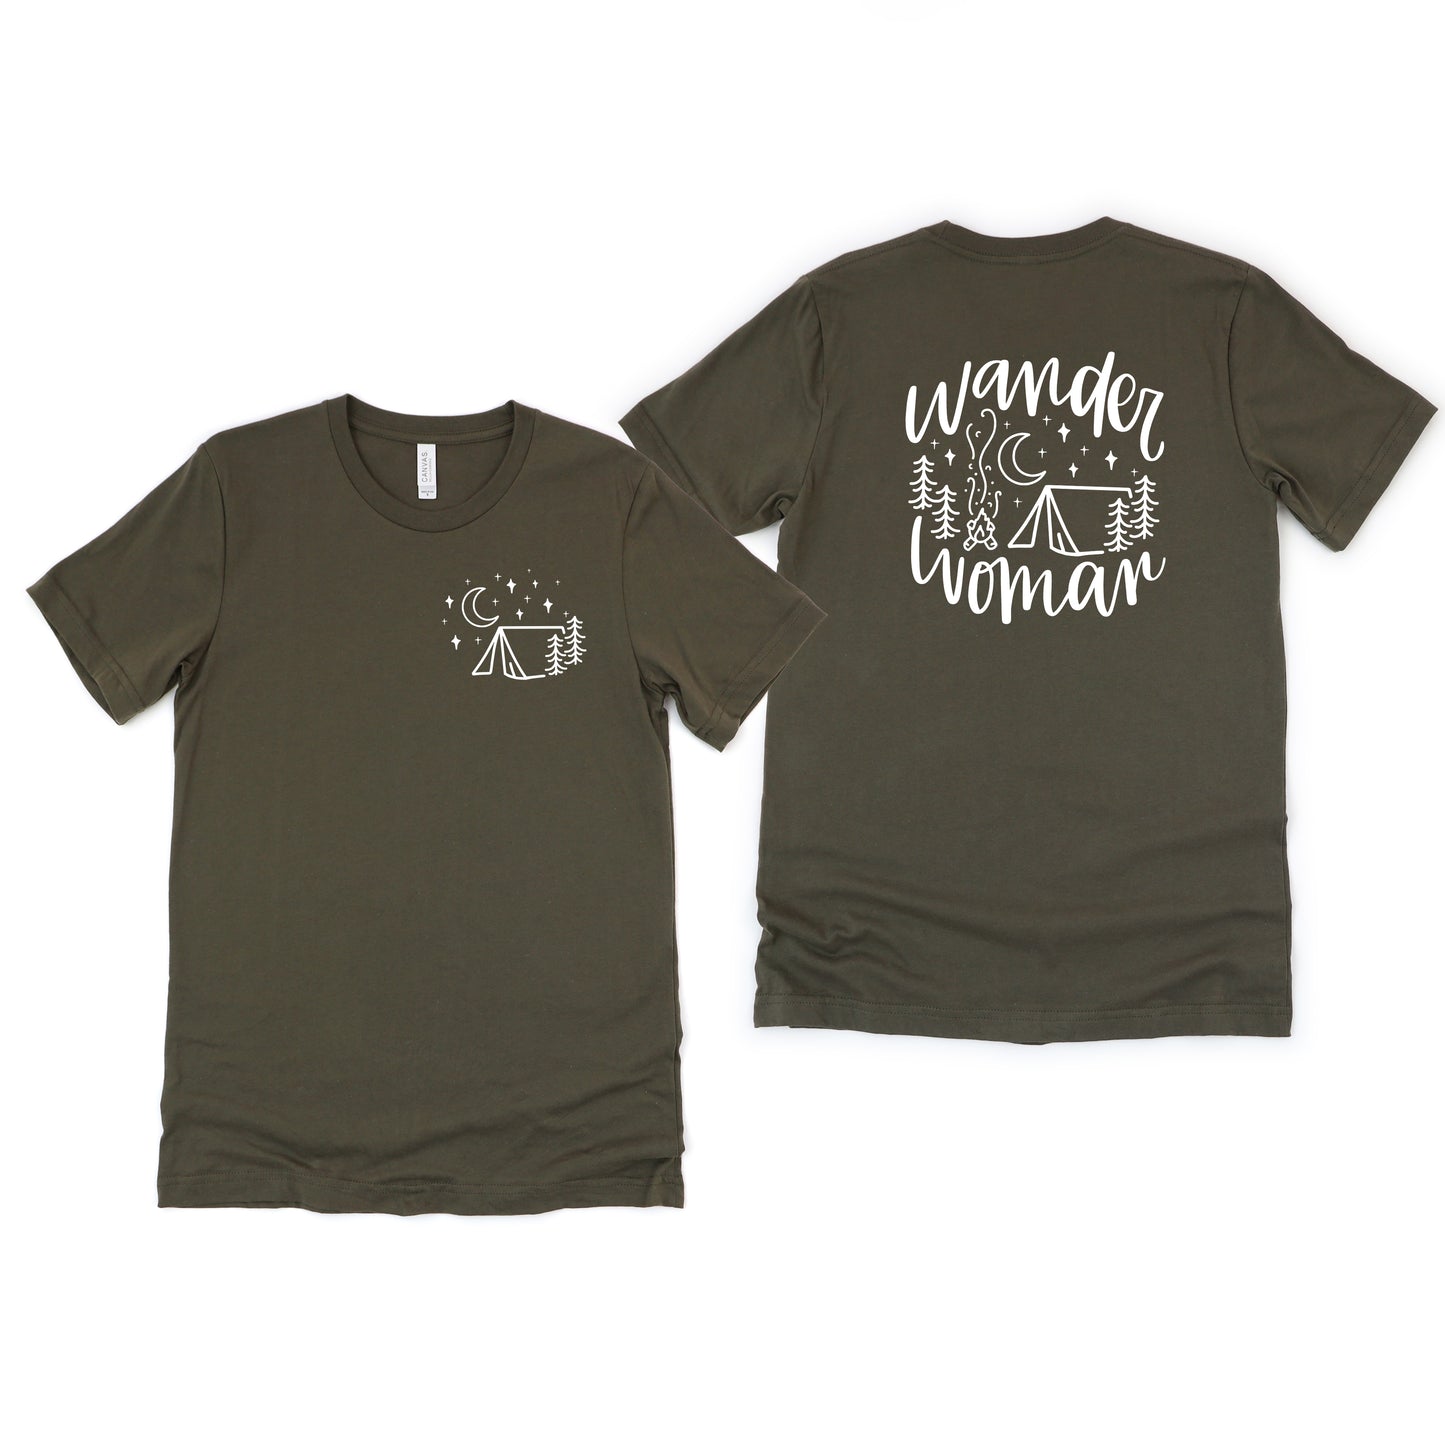 Wander Woman Tent | Front & Back Short Sleeve Graphic Tee